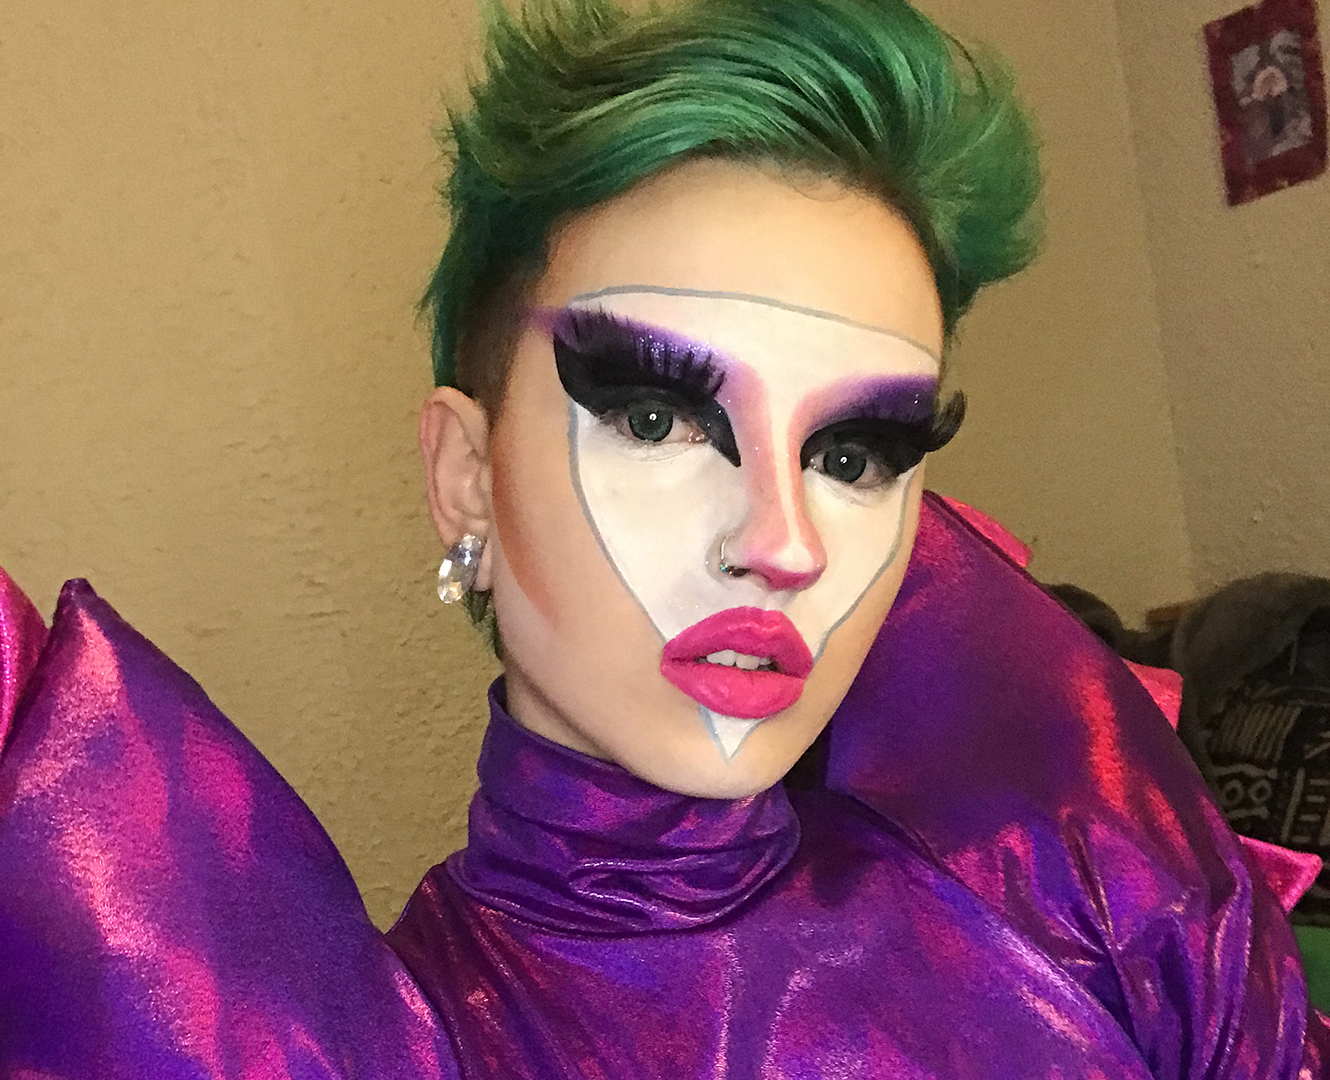 Drag queen poses with green hair and large purple dress